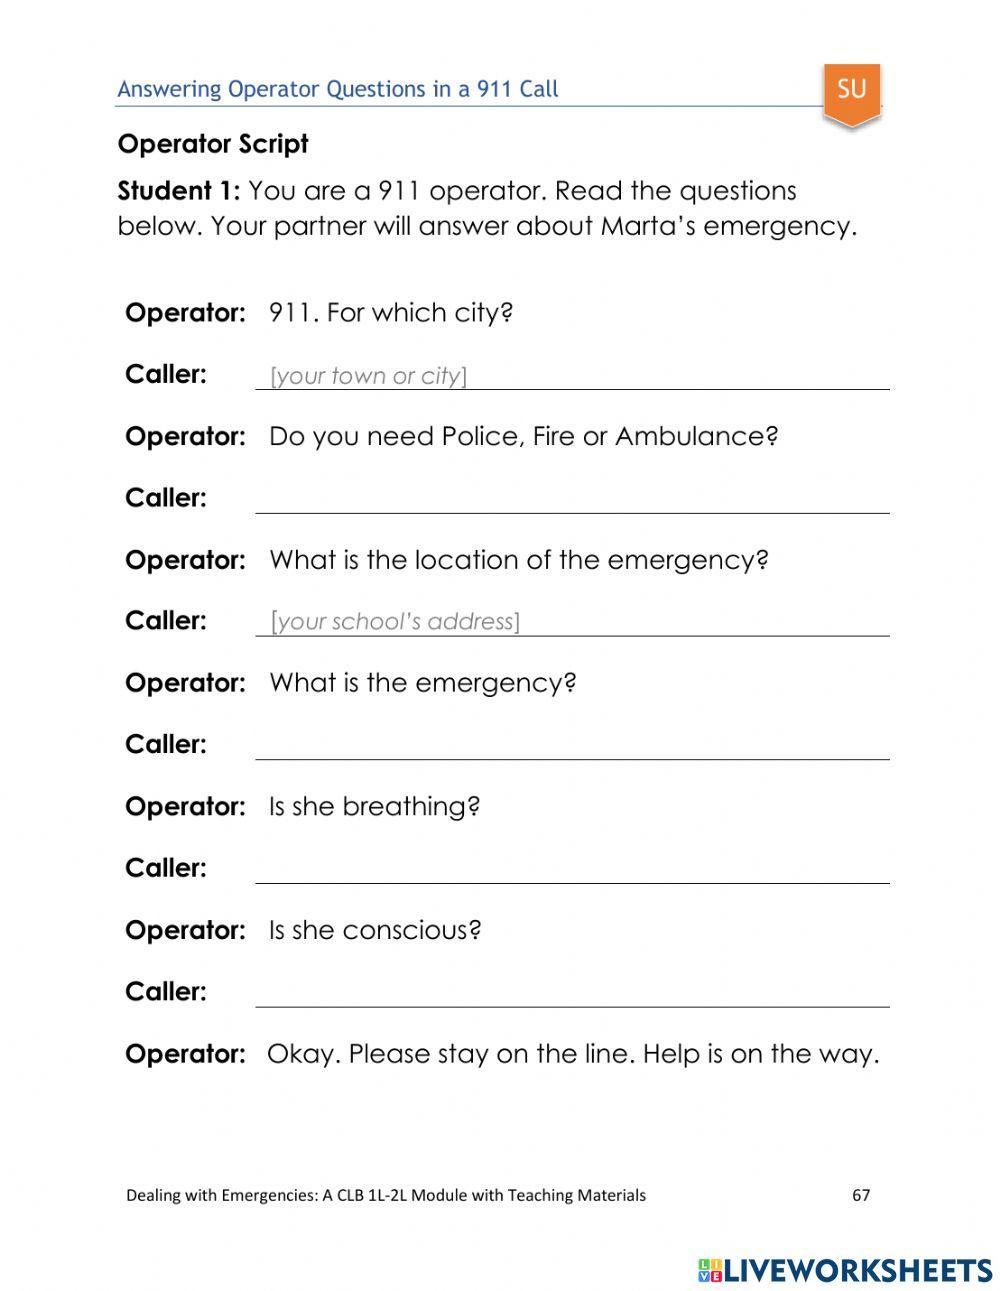 Answering 911 Operator's questions